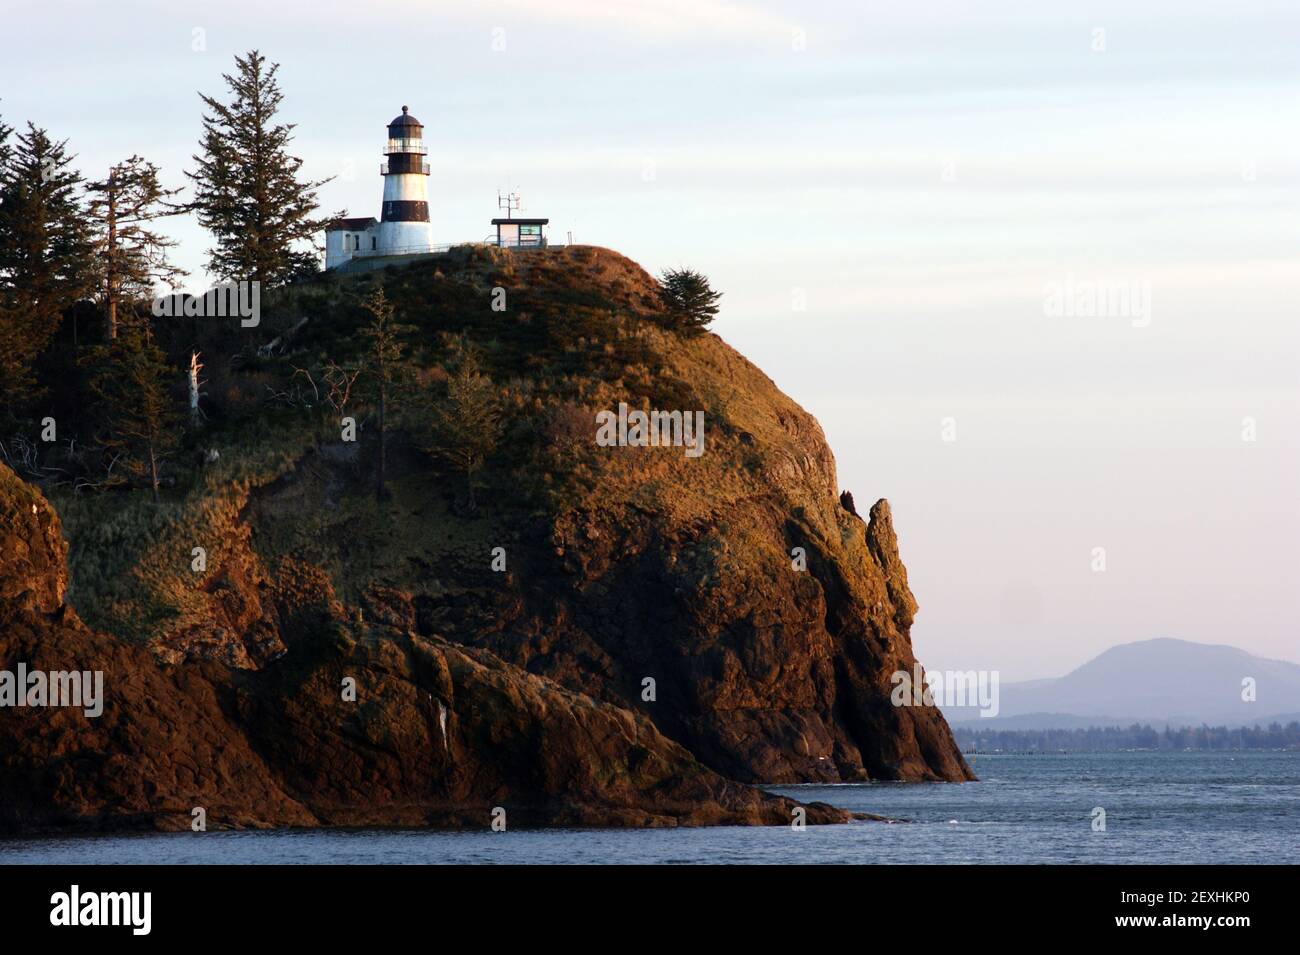 Pacific Coast Lighthouse Cape Disappointment Pacific Coast Ocean Stock Photo